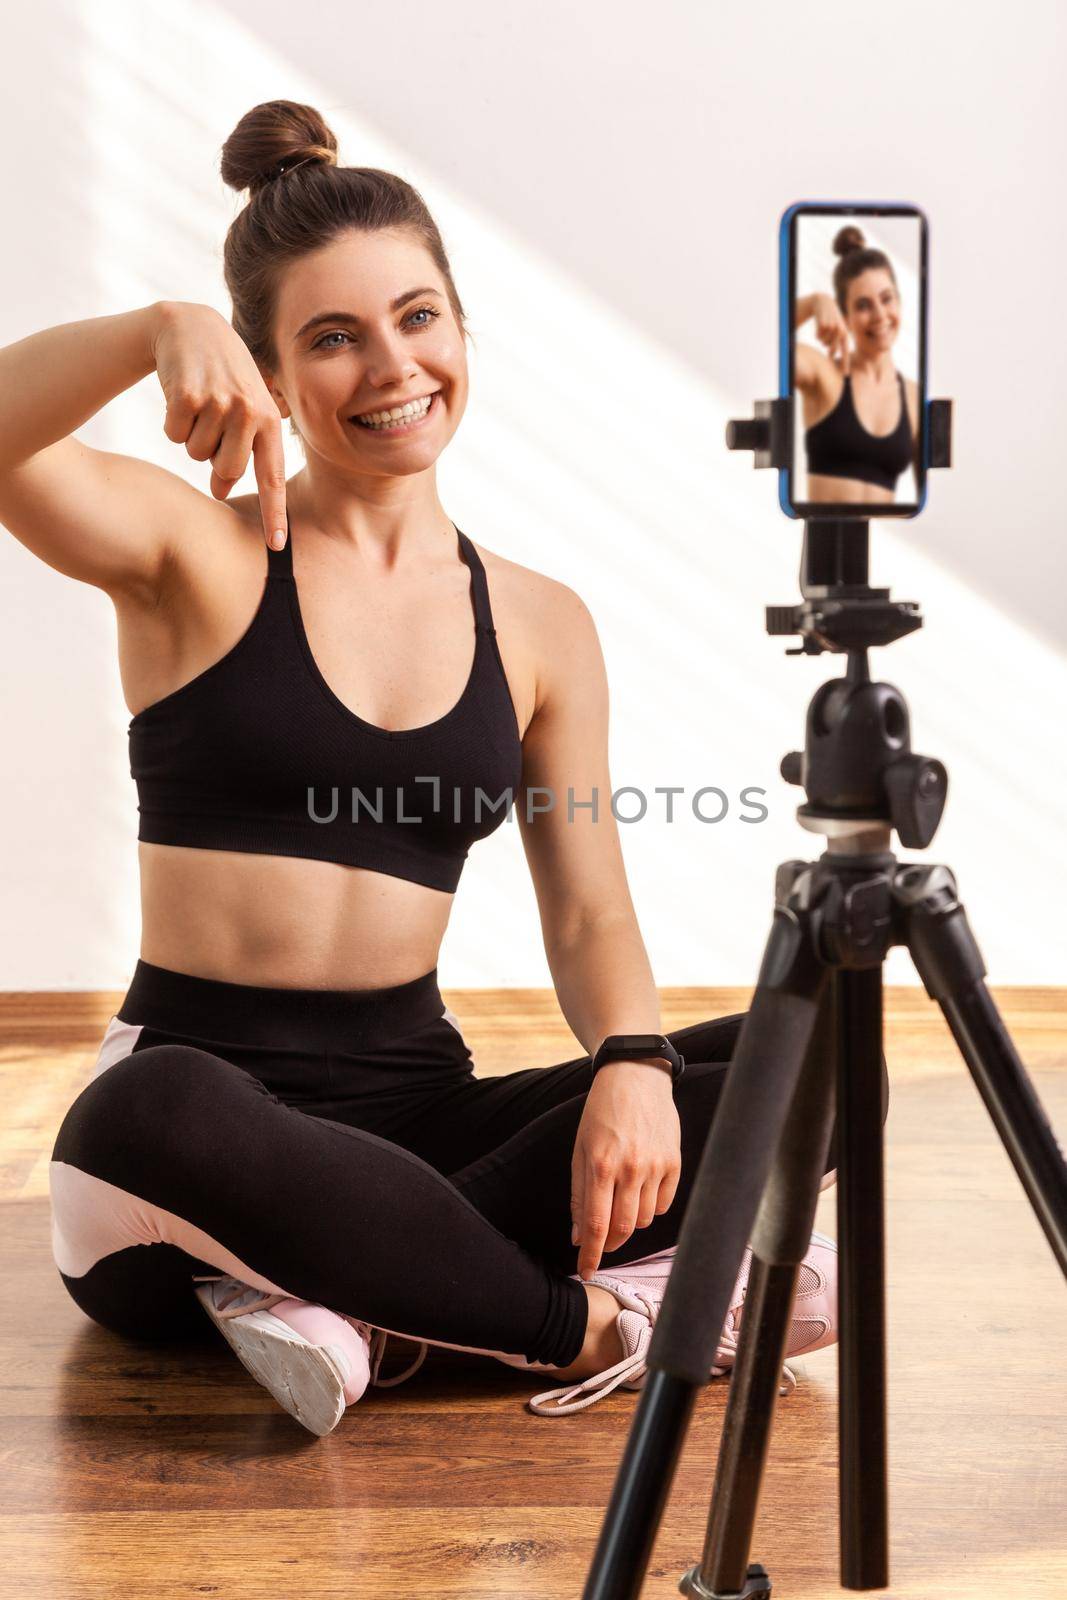 Online fitness trainer broadcasting workout online, points finger down, asking subscribe to her vlog, wearing black sports top and tights. Full length studio shot illuminated by sunlight from window.